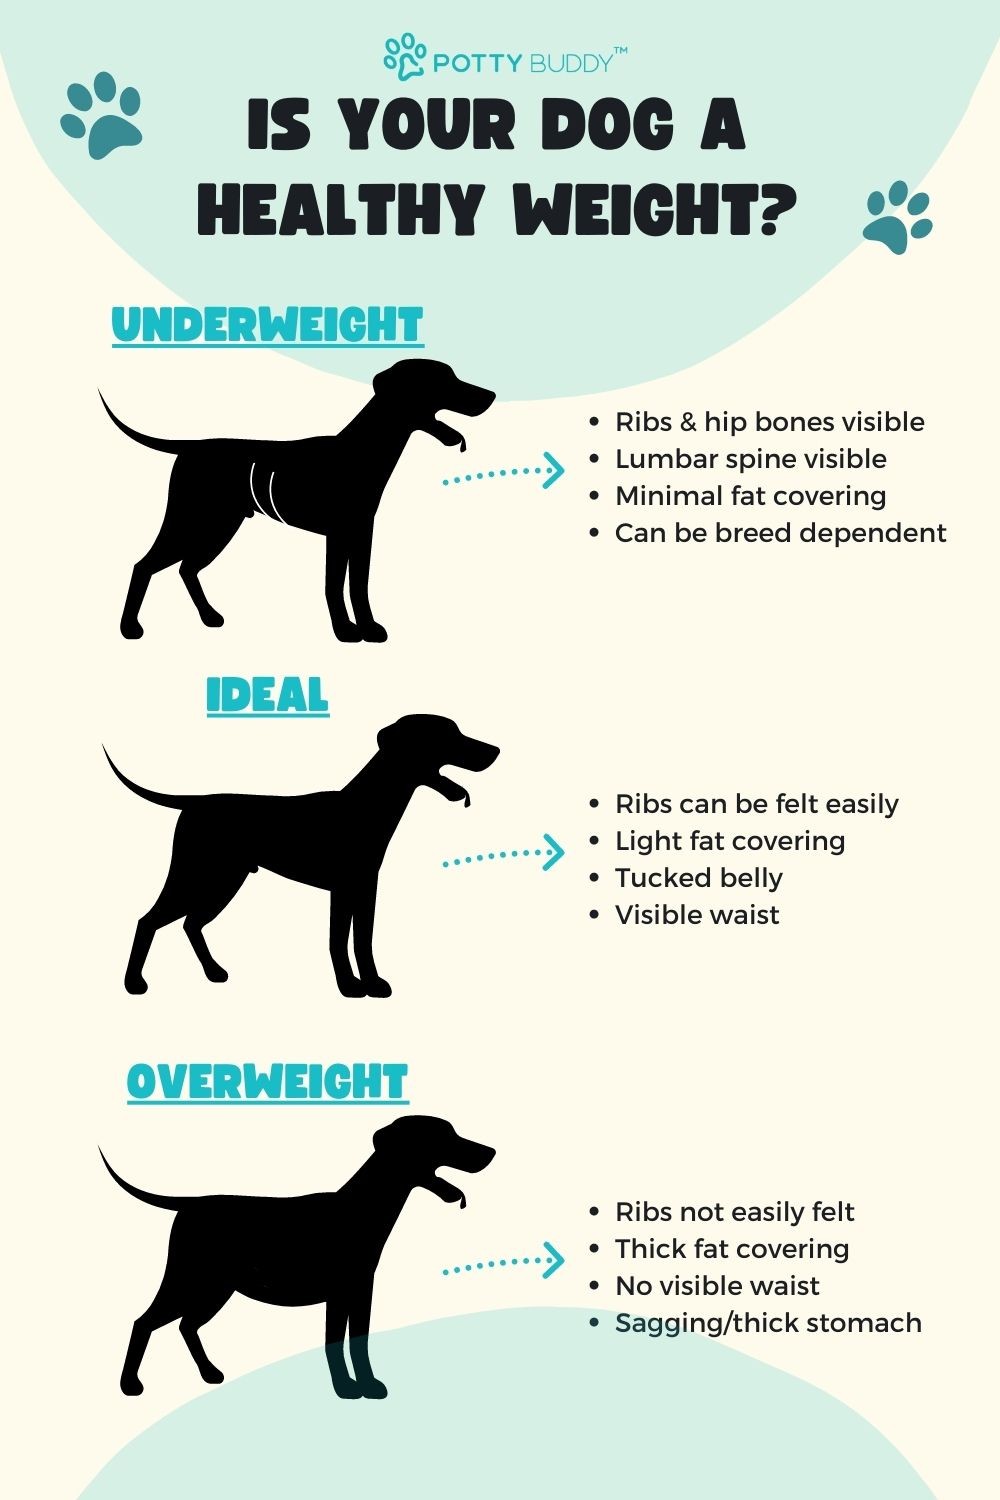 Is your dog a healthy weight?